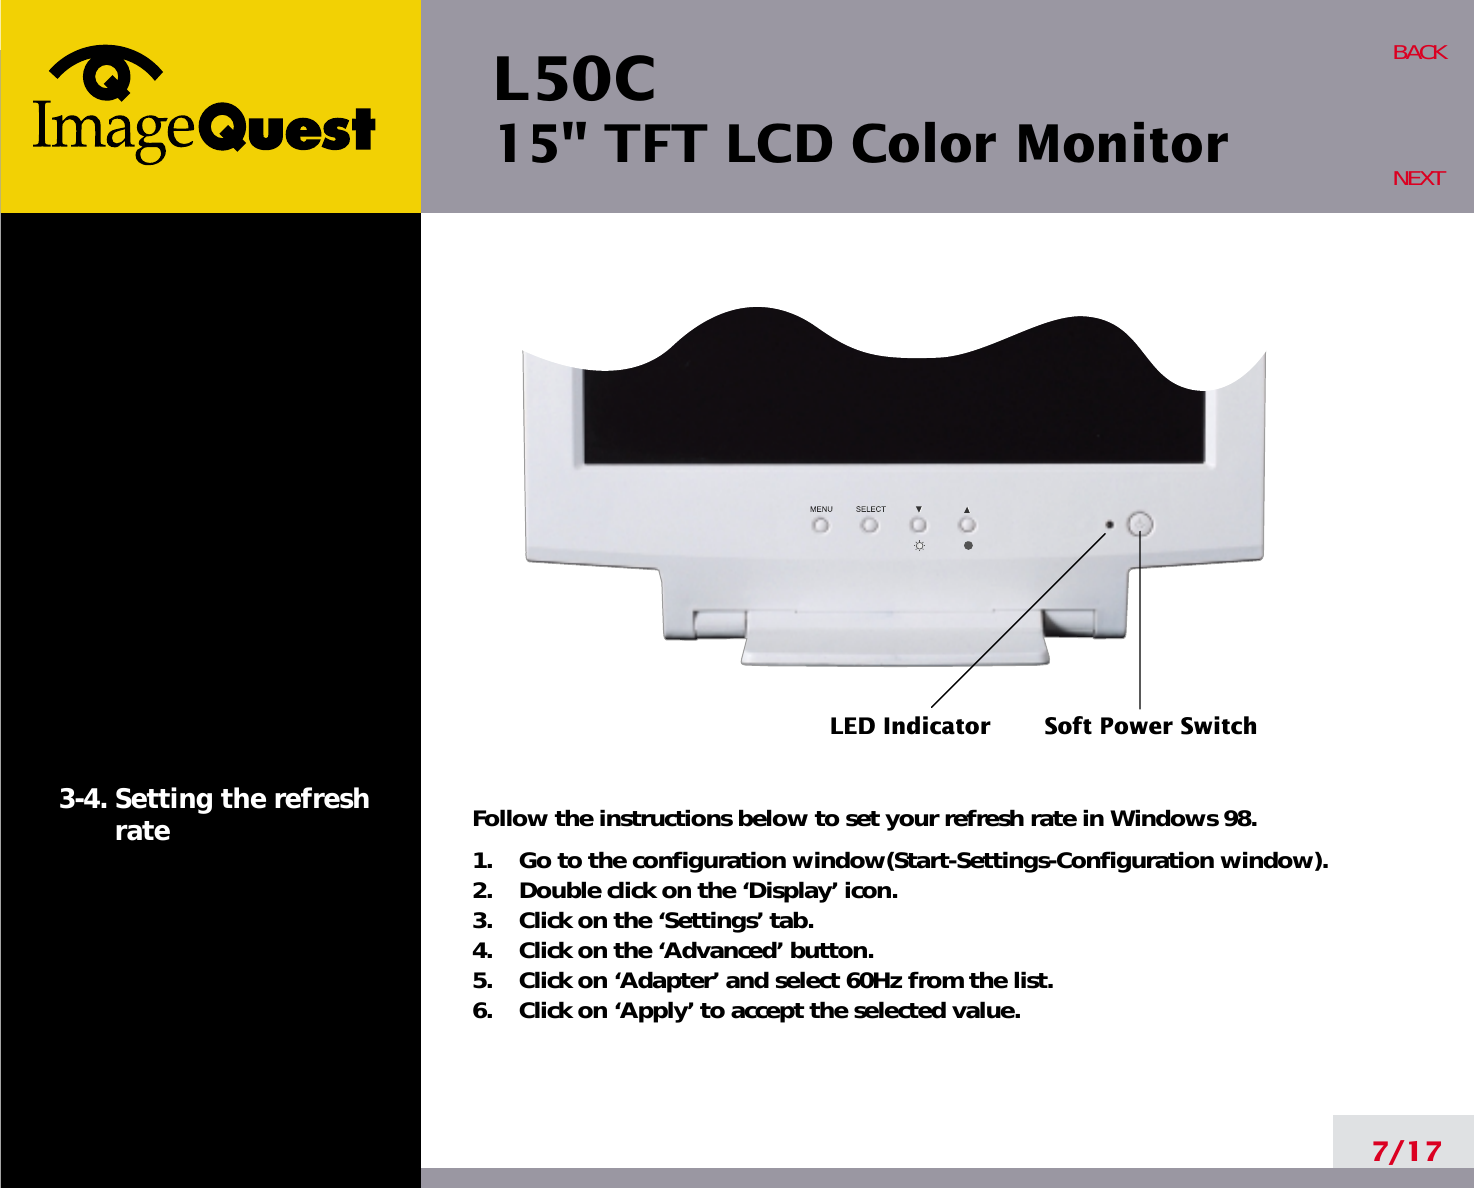 L50C15&quot; TFT LCD Color Monitor7/17BACKNEXT3-4. Setting the refreshrate Follow the instructions below to set your refresh rate in Windows 98.1.    Go to the configuration window(Start-Settings-Configuration window).2.    Double click on the ‘Display’ icon.3.    Click on the ‘Settings’ tab.4.    Click on the ‘Advanced’ button.5.    Click on ‘Adapter’ and select 60Hz from the list.6.    Click on ‘Apply’ to accept the selected value.LED Indicator Soft Power Switch